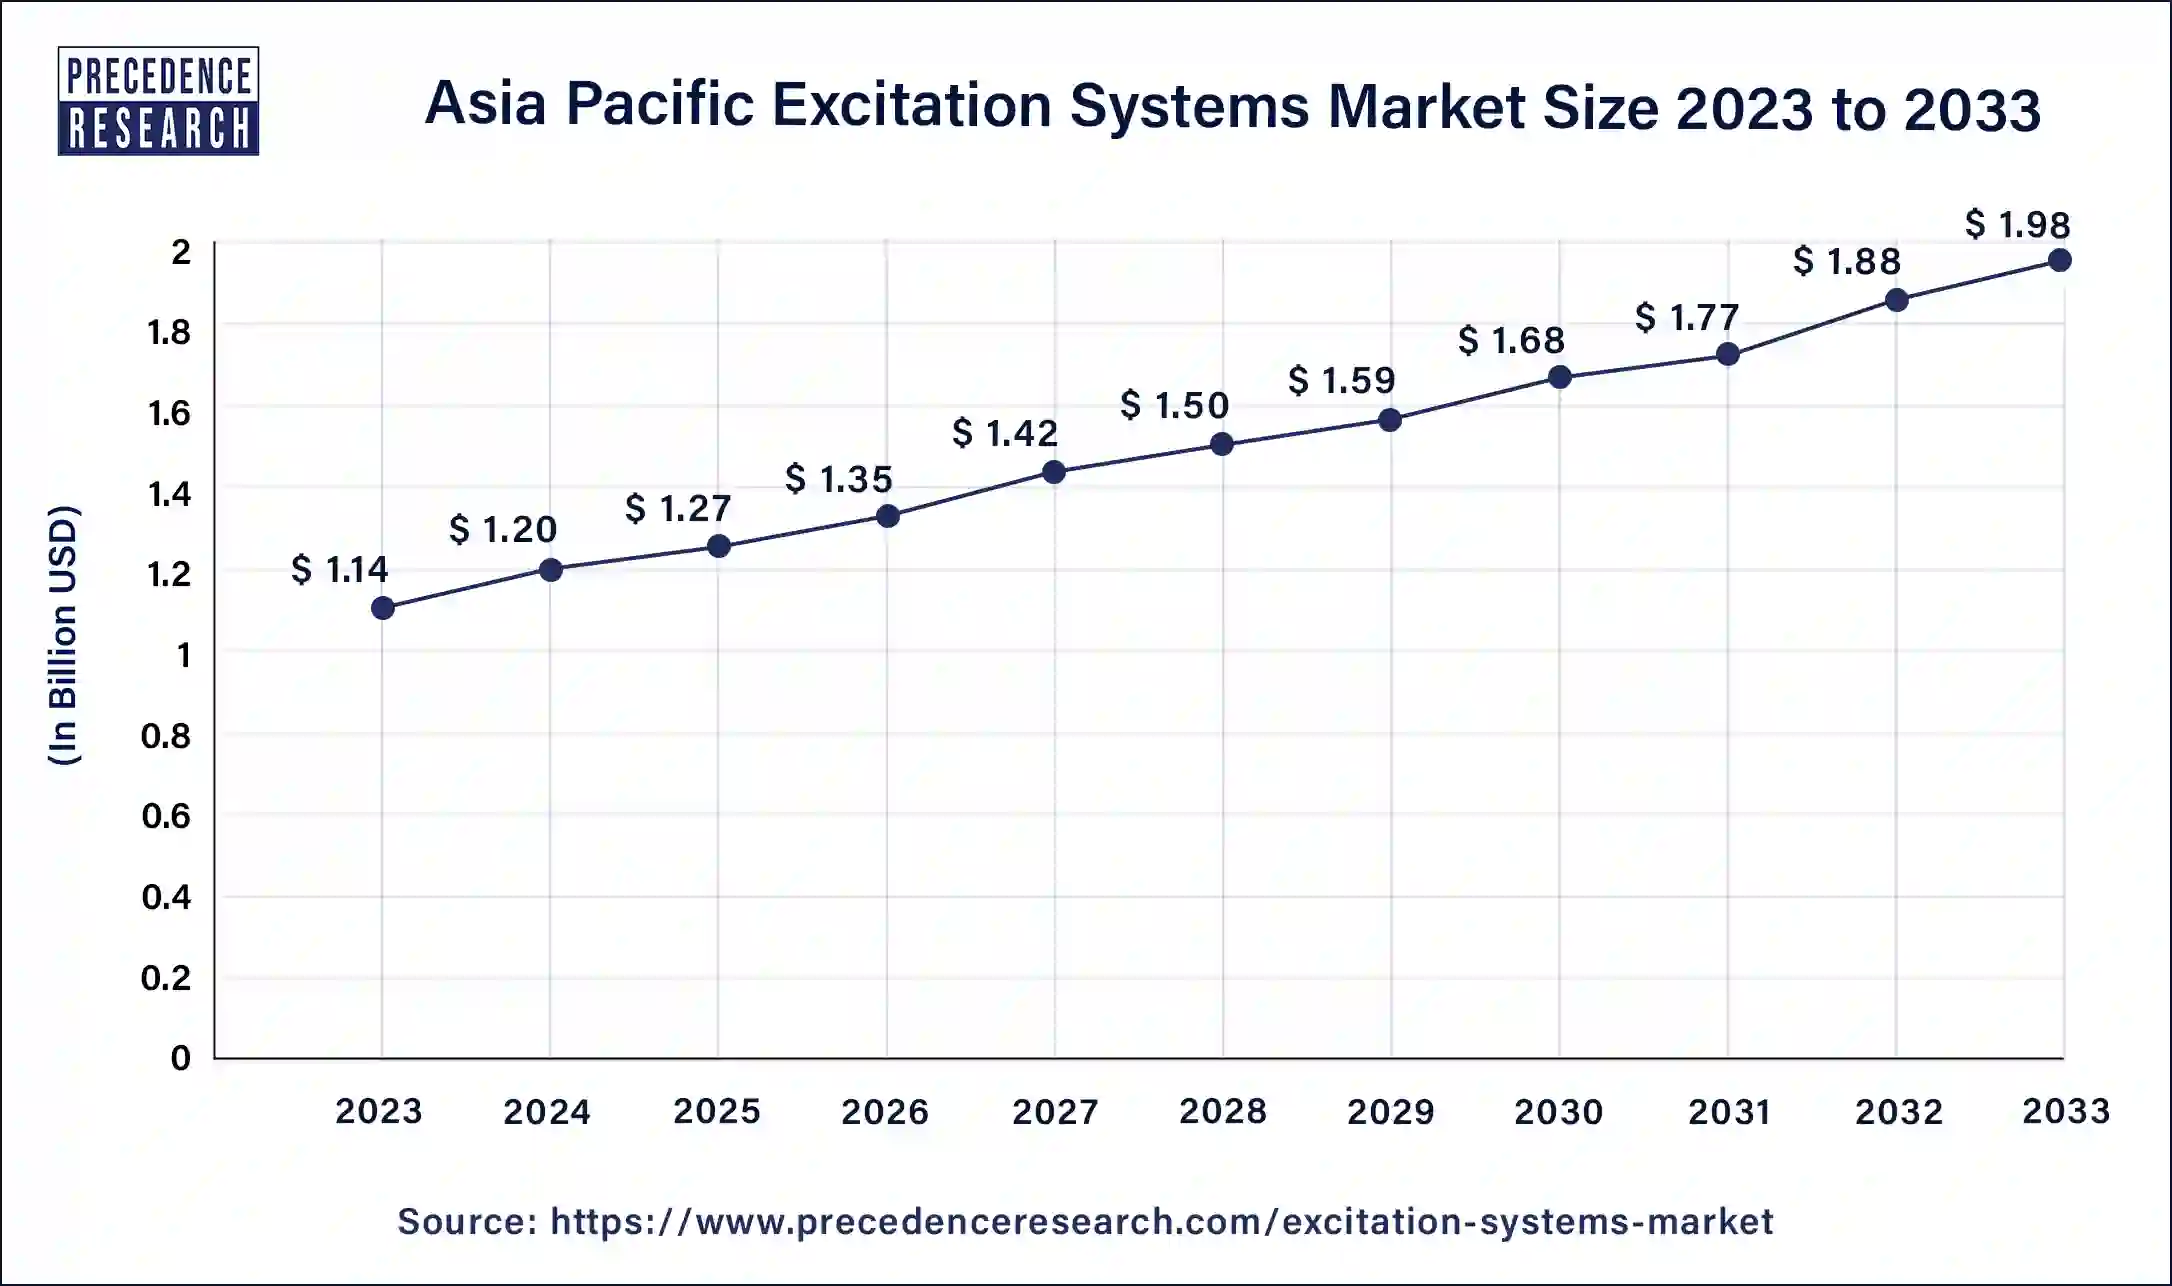 Asia Pacific Excitation Systems Market Size 2024 to 2033